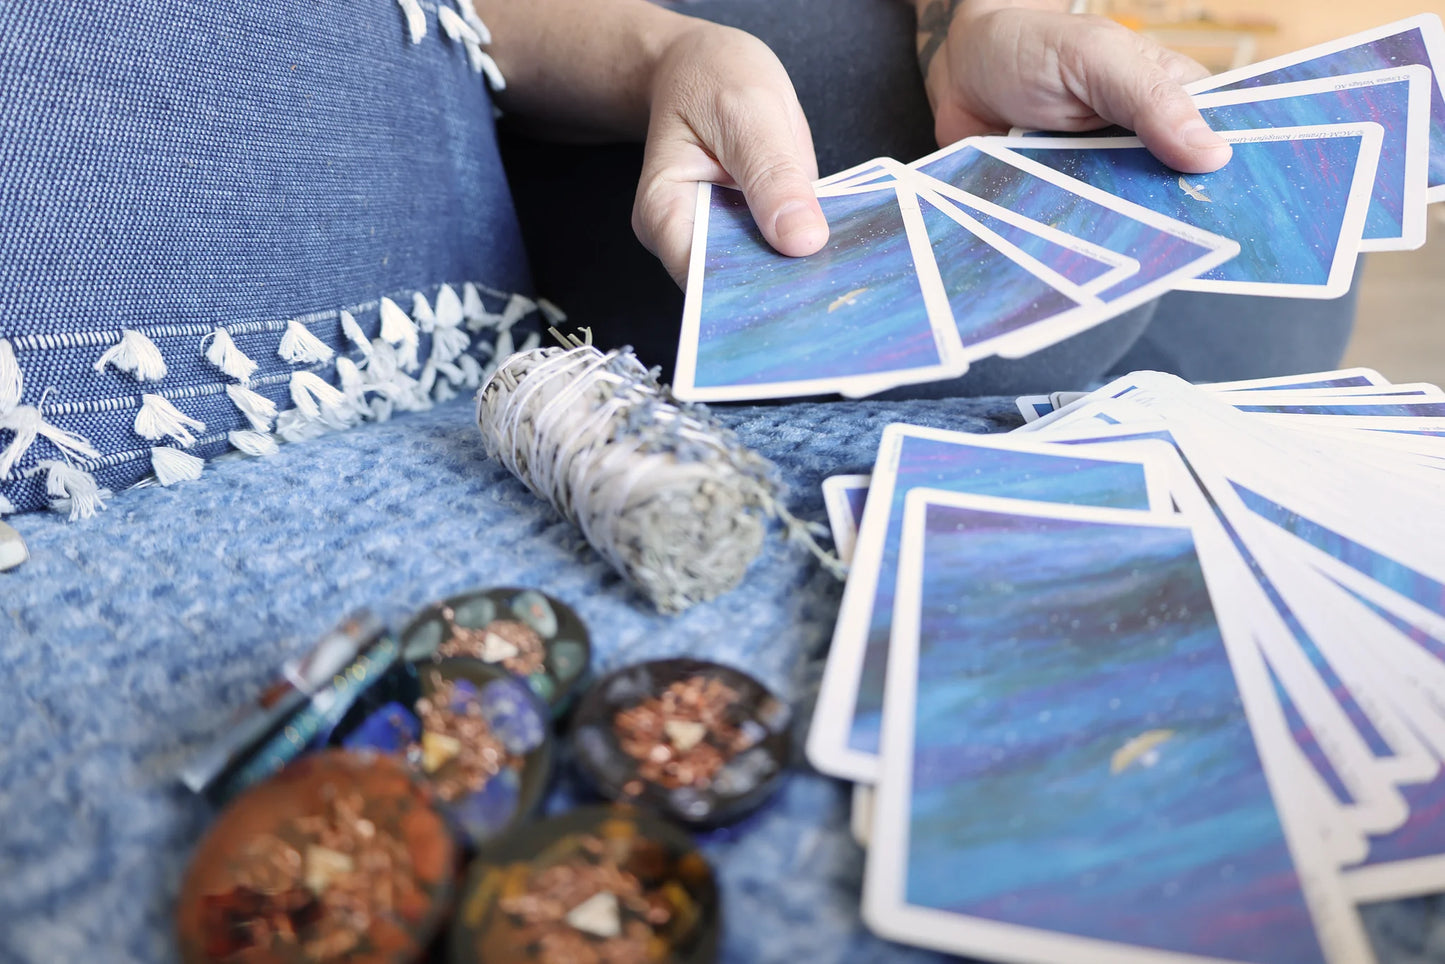 30 MINUTE CARD READING